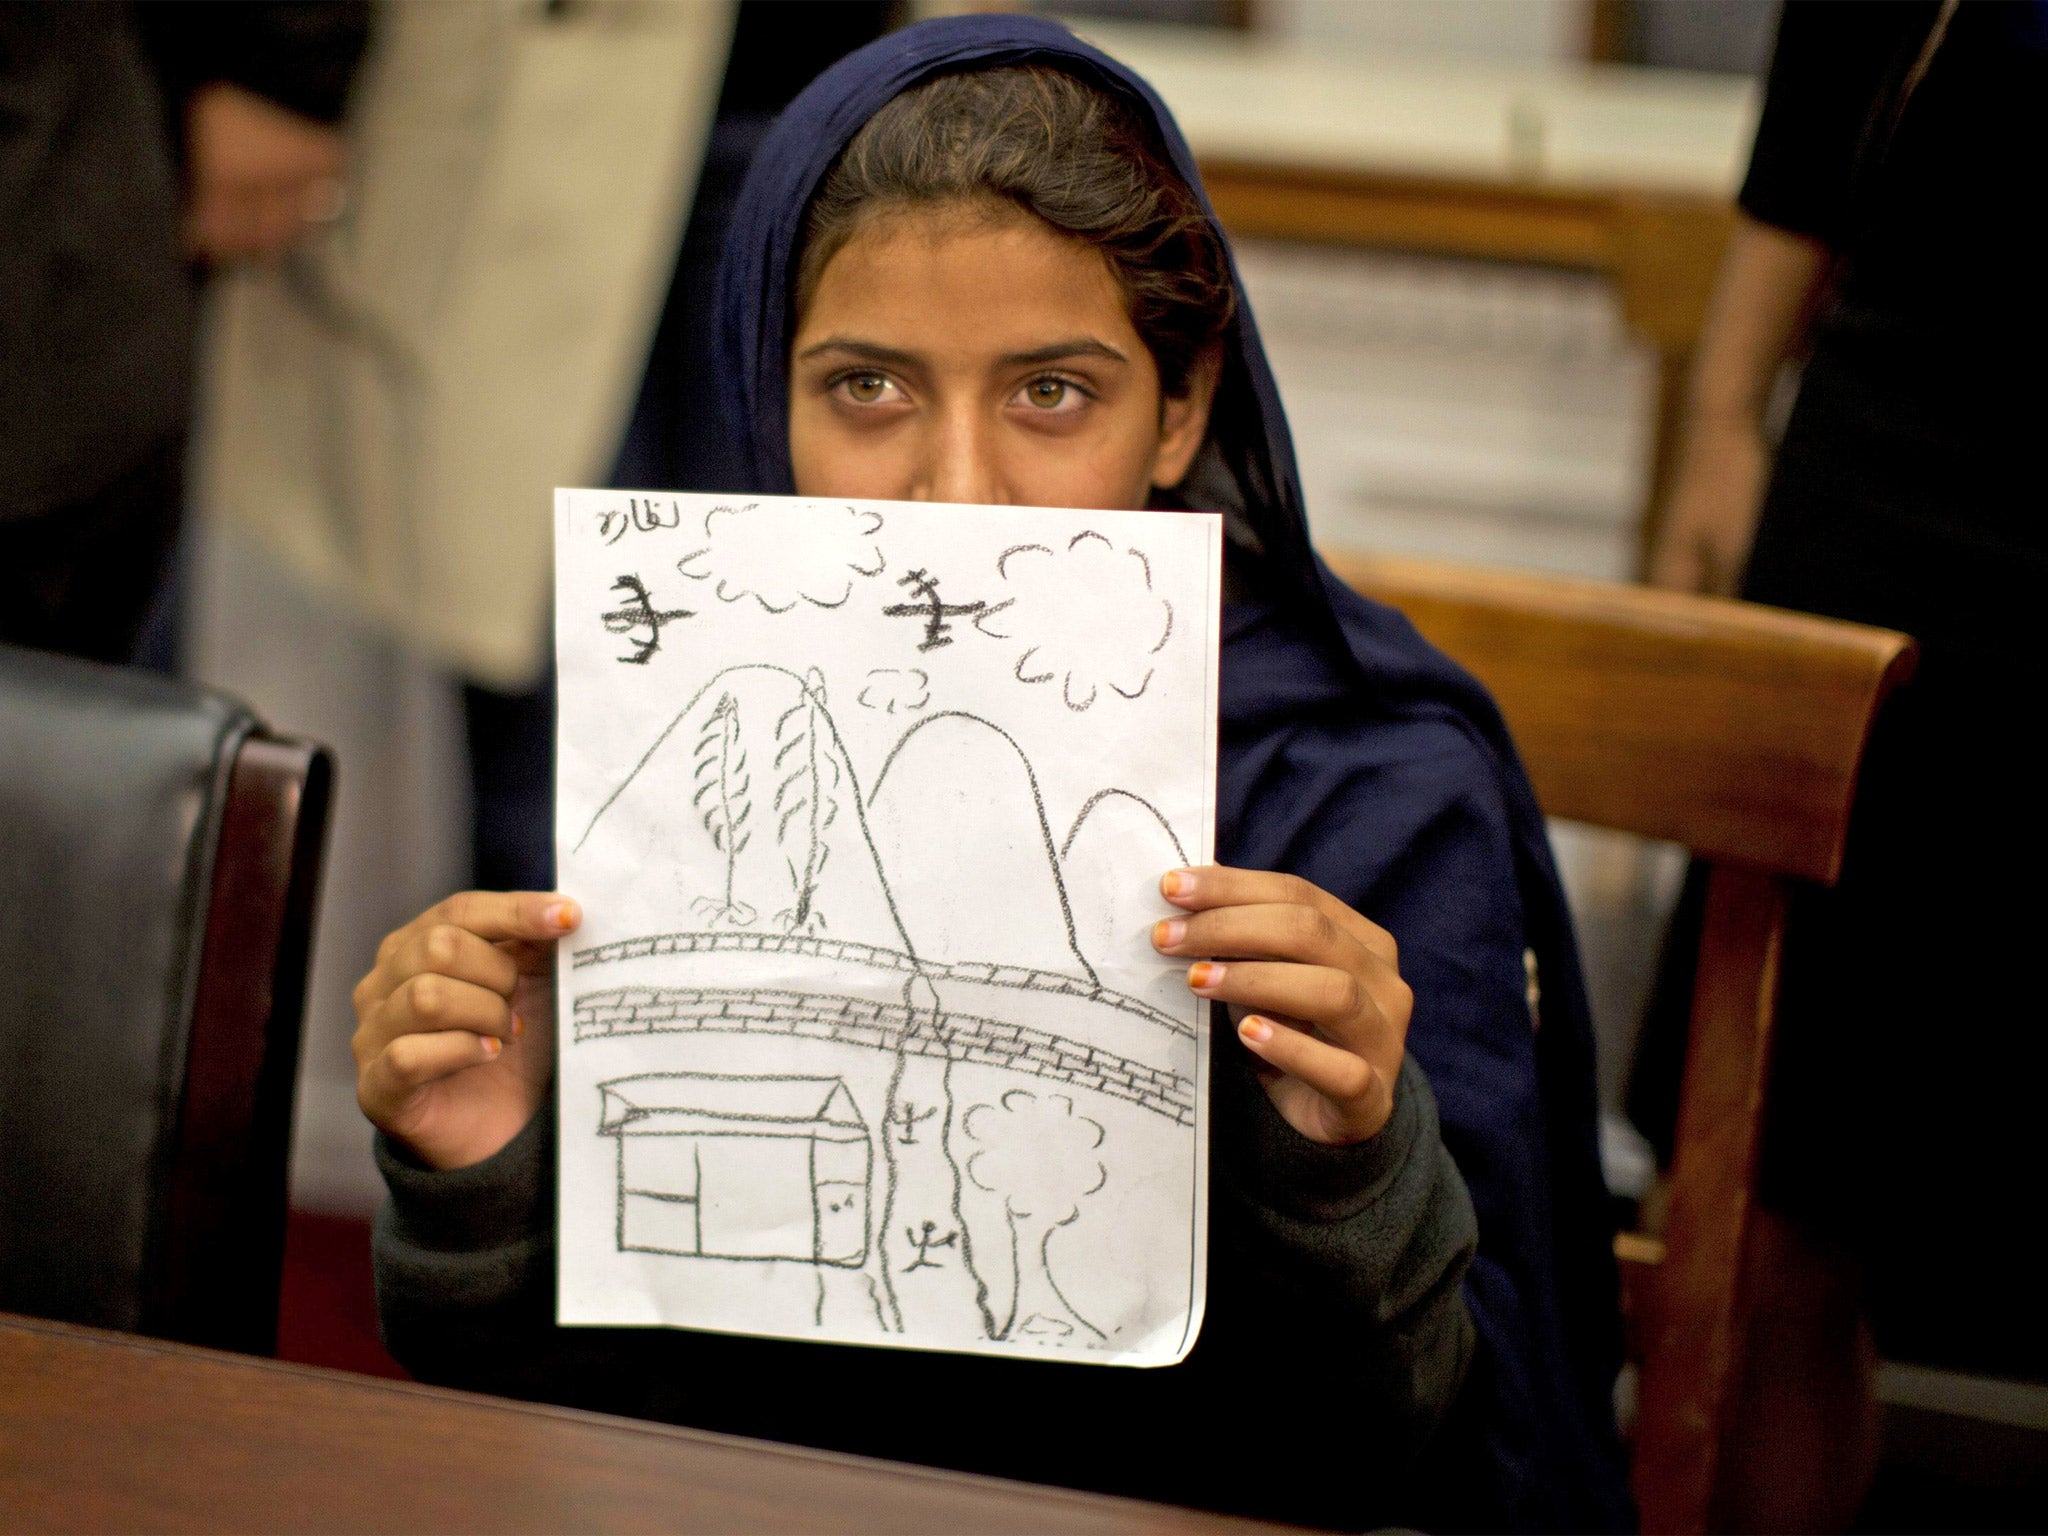 Nabila Rehman holds up a picture she drew depicting the drone strike on her village